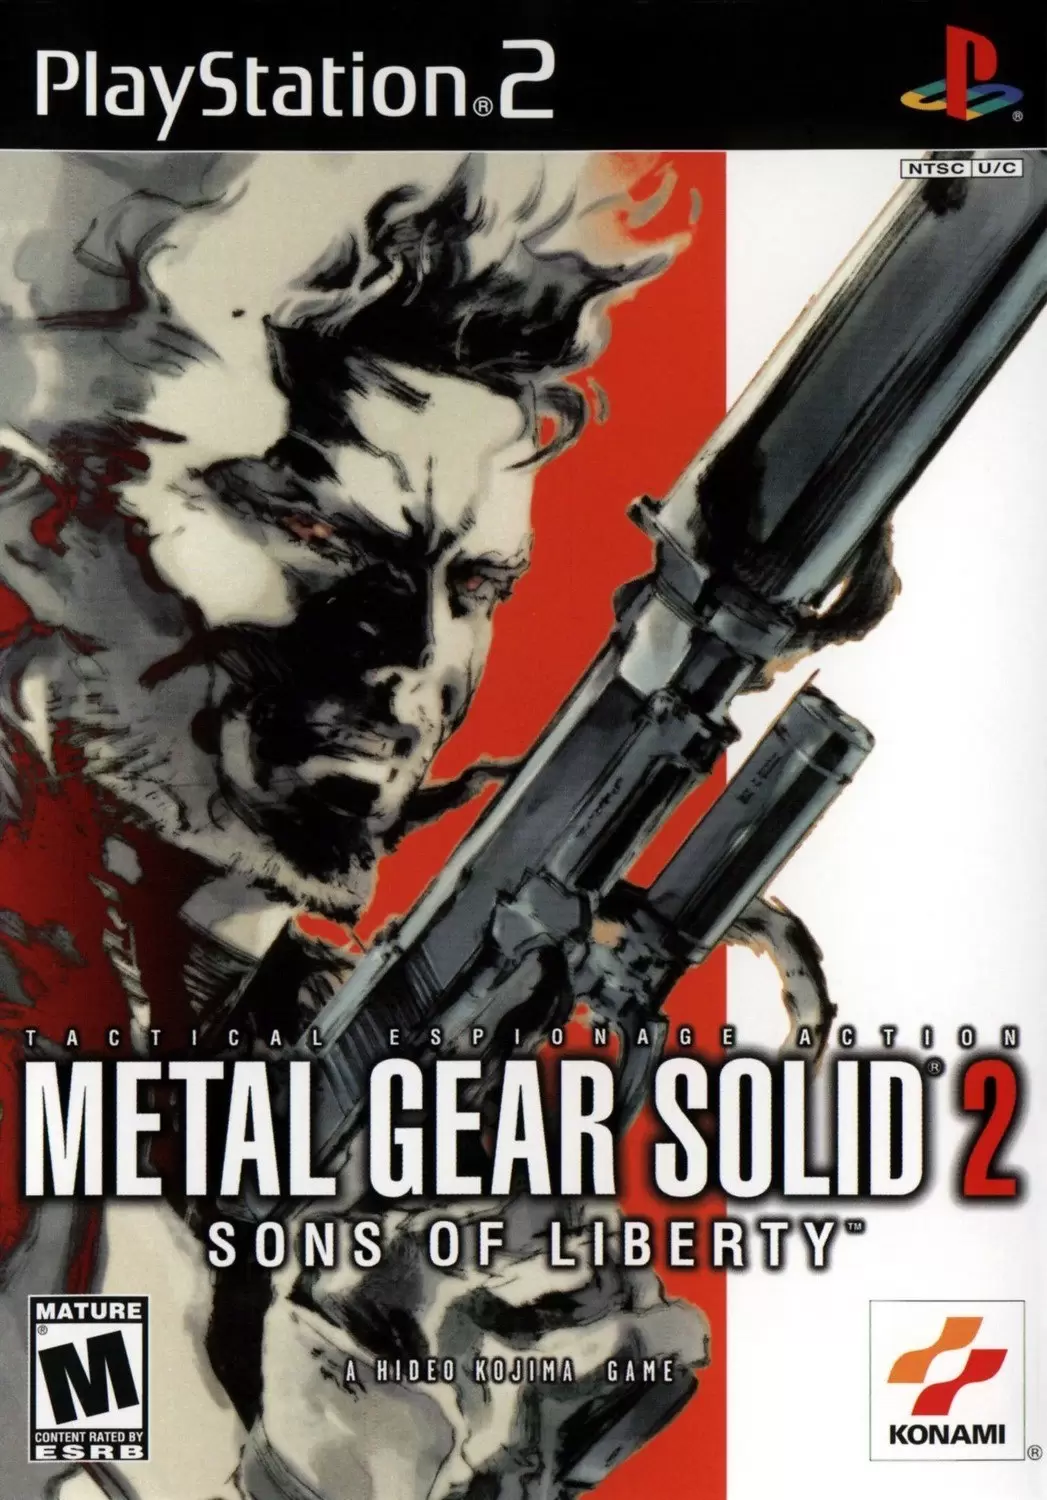 PS2 Games - Metal Gear Solid 2: Sons of Liberty